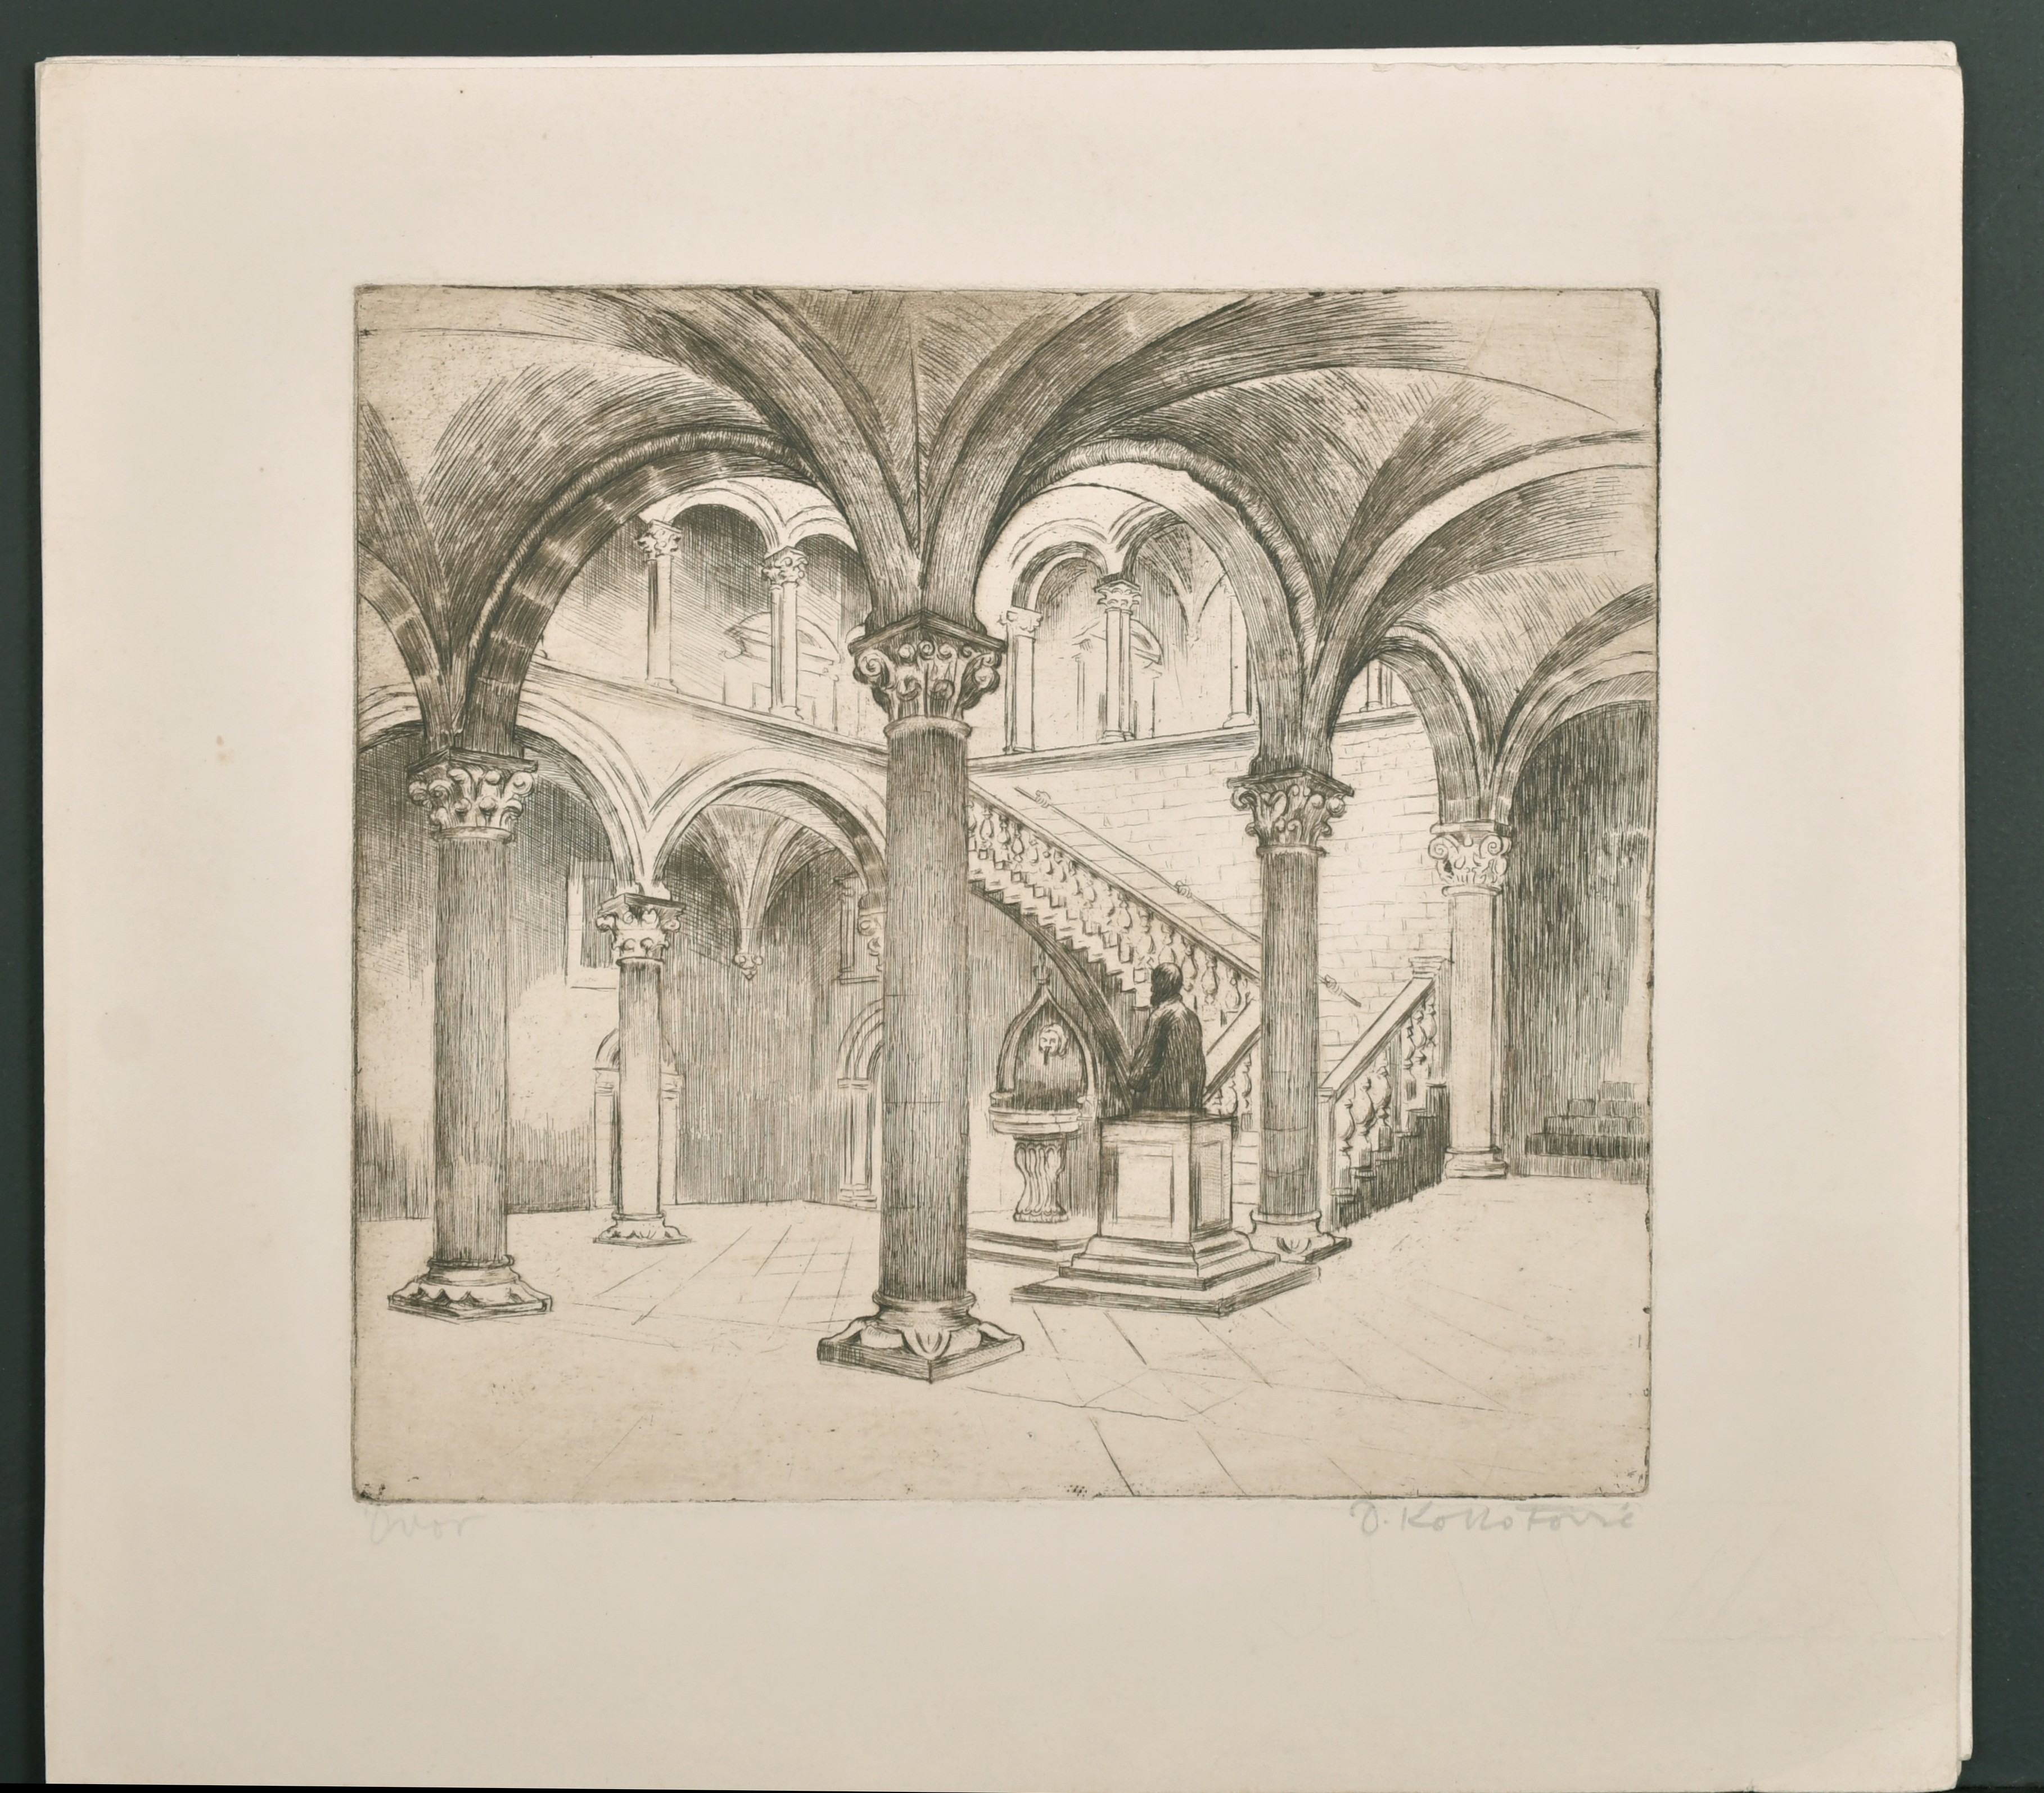 Early 20th Century European School. "Dubrovnik", Etching, Indistinctly Signed and Inscribed in - Image 2 of 6